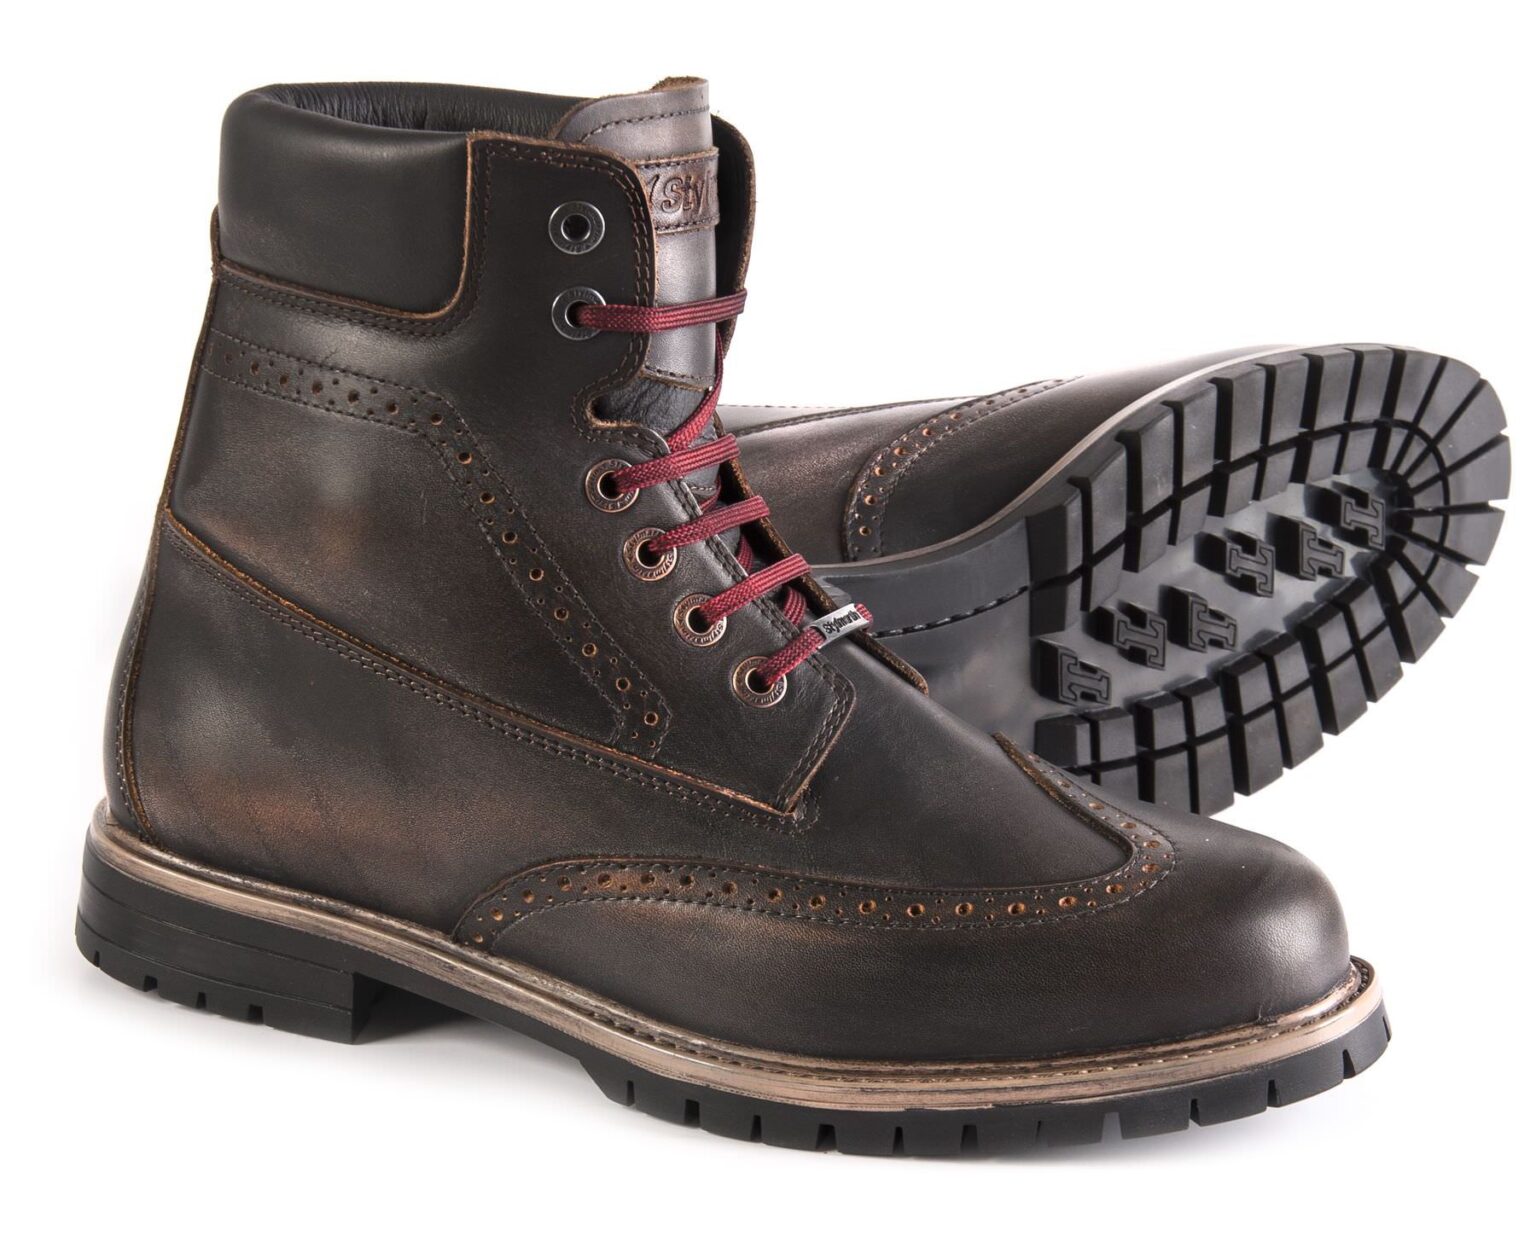 Stylmartin Wave Boots – Classically-Styled Motorcycle Boots